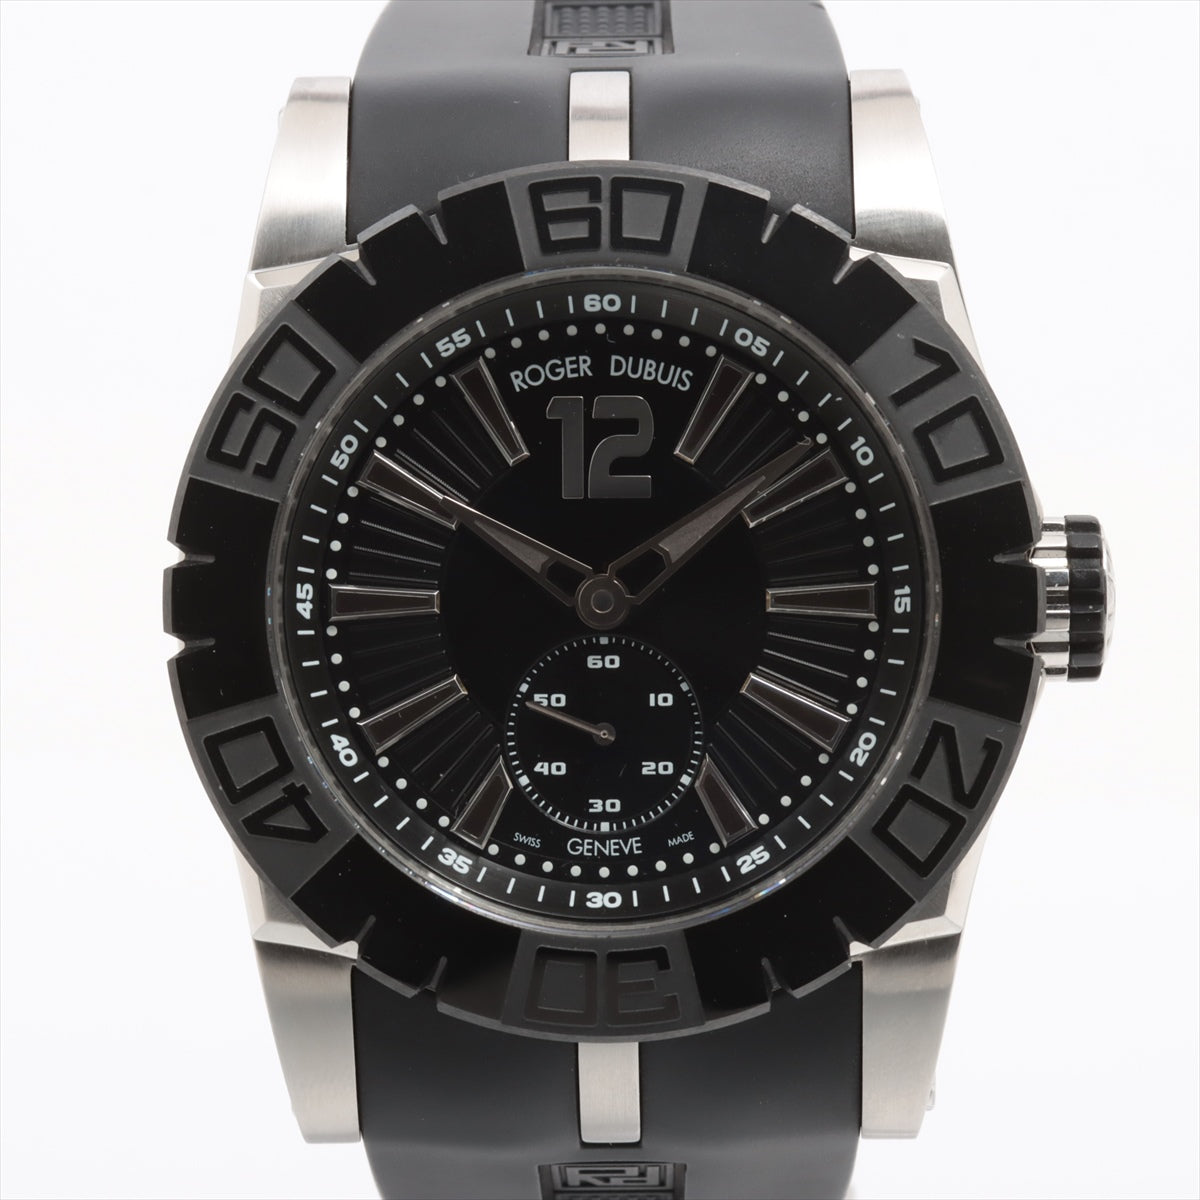 Roger Dubuis Easy Diver SED46-821-93-00/09A01/A1 SS & rubber AT Black-Face